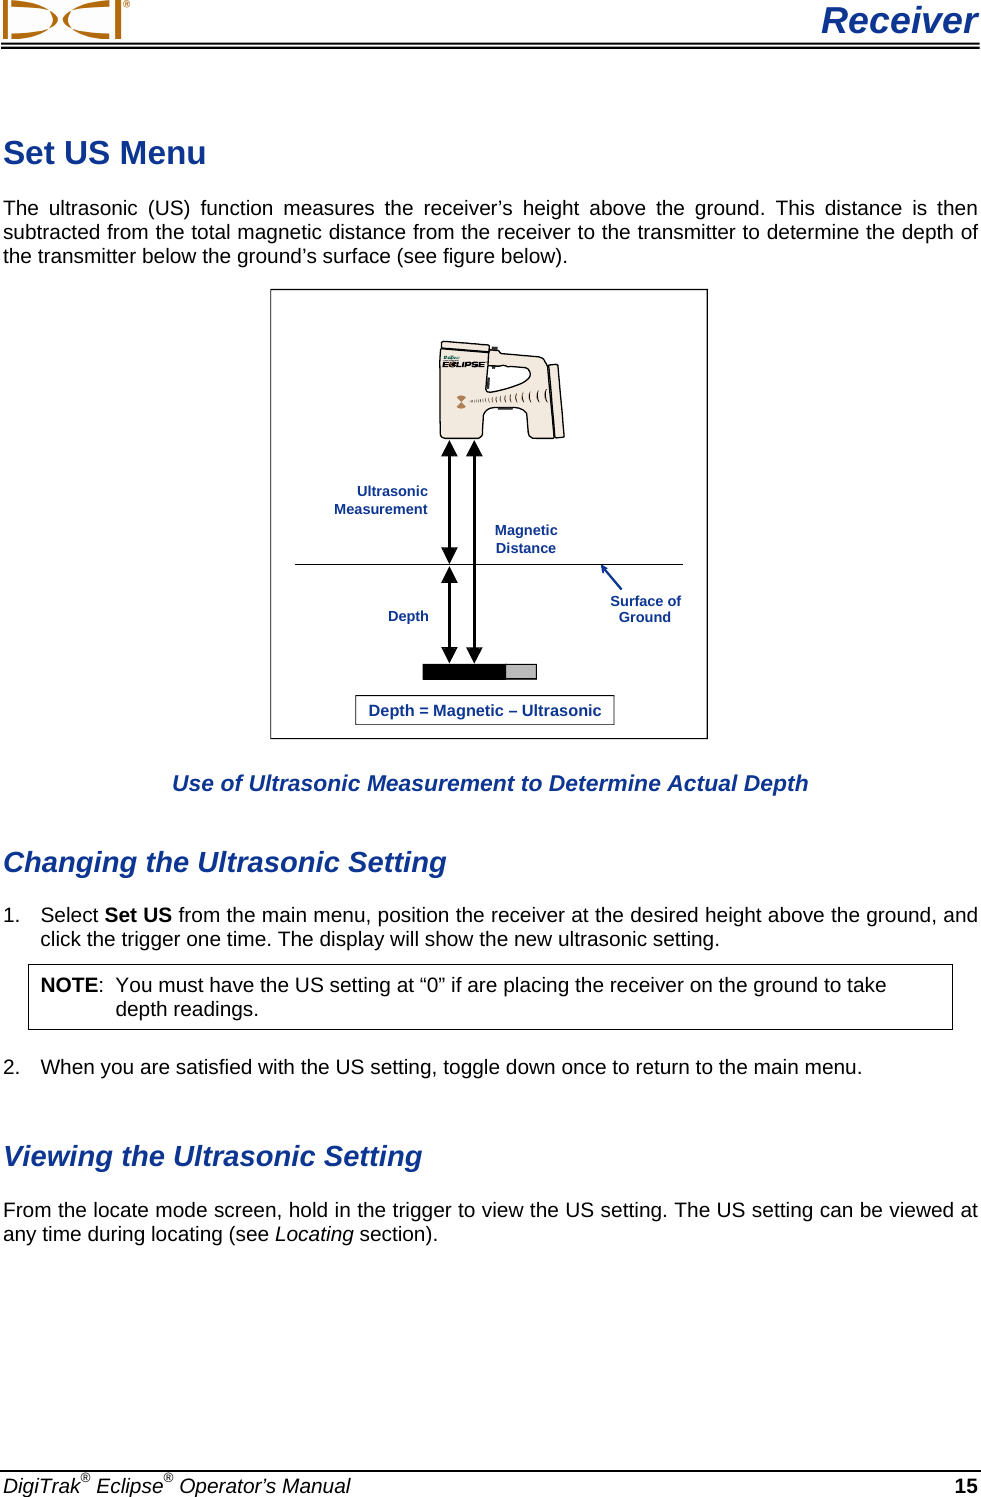  Receiver Set US Menu The ultrasonic (US) function measures the receiver’s height above the ground. This distance is then subtracted from the total magnetic distance from the receiver to the transmitter to determine the depth of the transmitter below the ground’s surface (see figure below).  UltrasonicMeasurementDepthMagneticDistanceSurface ofGroundDepth = Magnetic – Ultrasonic  Use of Ultrasonic Measurement to Determine Actual Depth  Changing the Ultrasonic Setting 1. Select Set US from the main menu, position the receiver at the desired height above the ground, and click the trigger one time. The display will show the new ultrasonic setting.  NOTE:  You must have the US setting at “0” if are placing the receiver on the ground to take depth readings. 2.  When you are satisfied with the US setting, toggle down once to return to the main menu.   Viewing the Ultrasonic Setting From the locate mode screen, hold in the trigger to view the US setting. The US setting can be viewed at any time during locating (see Locating section).   DigiTrak® Eclipse® Operator’s Manual 15 